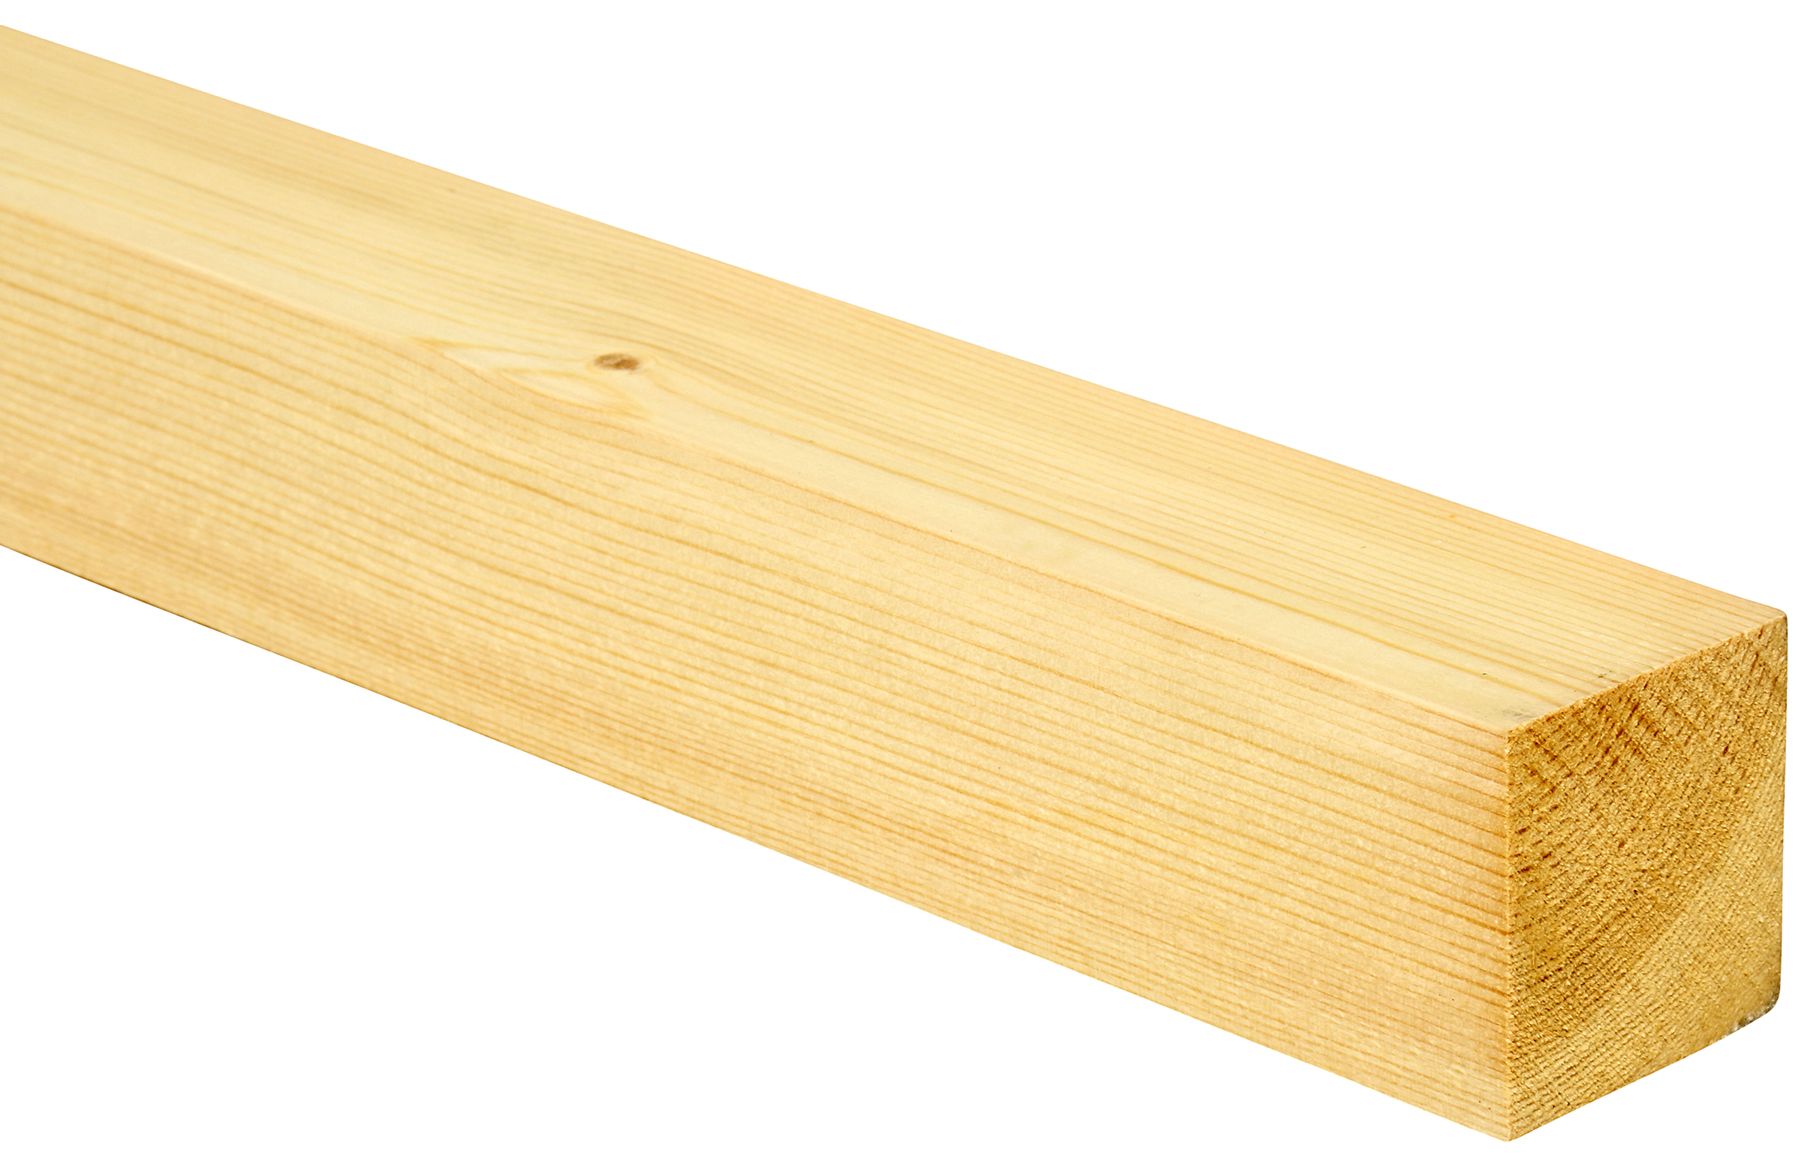 Image of Wickes Redwood PSE Timber - 44 x 44 x 2400mm